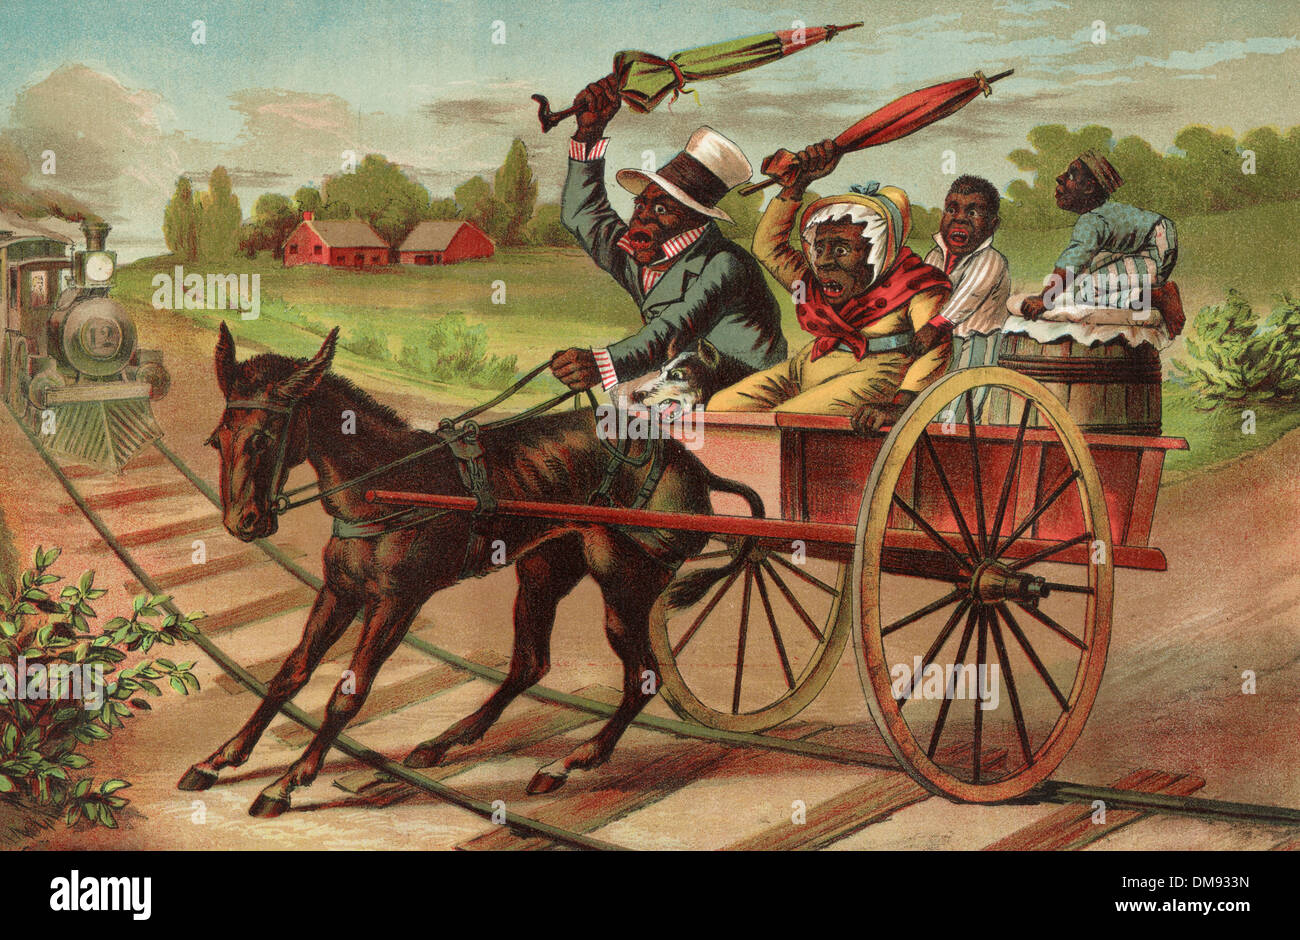 A mule crossed train - a mule stops on the railroad tracks while a train is coming and an African American family desperately tries to get him to move 1883 Stock Photo